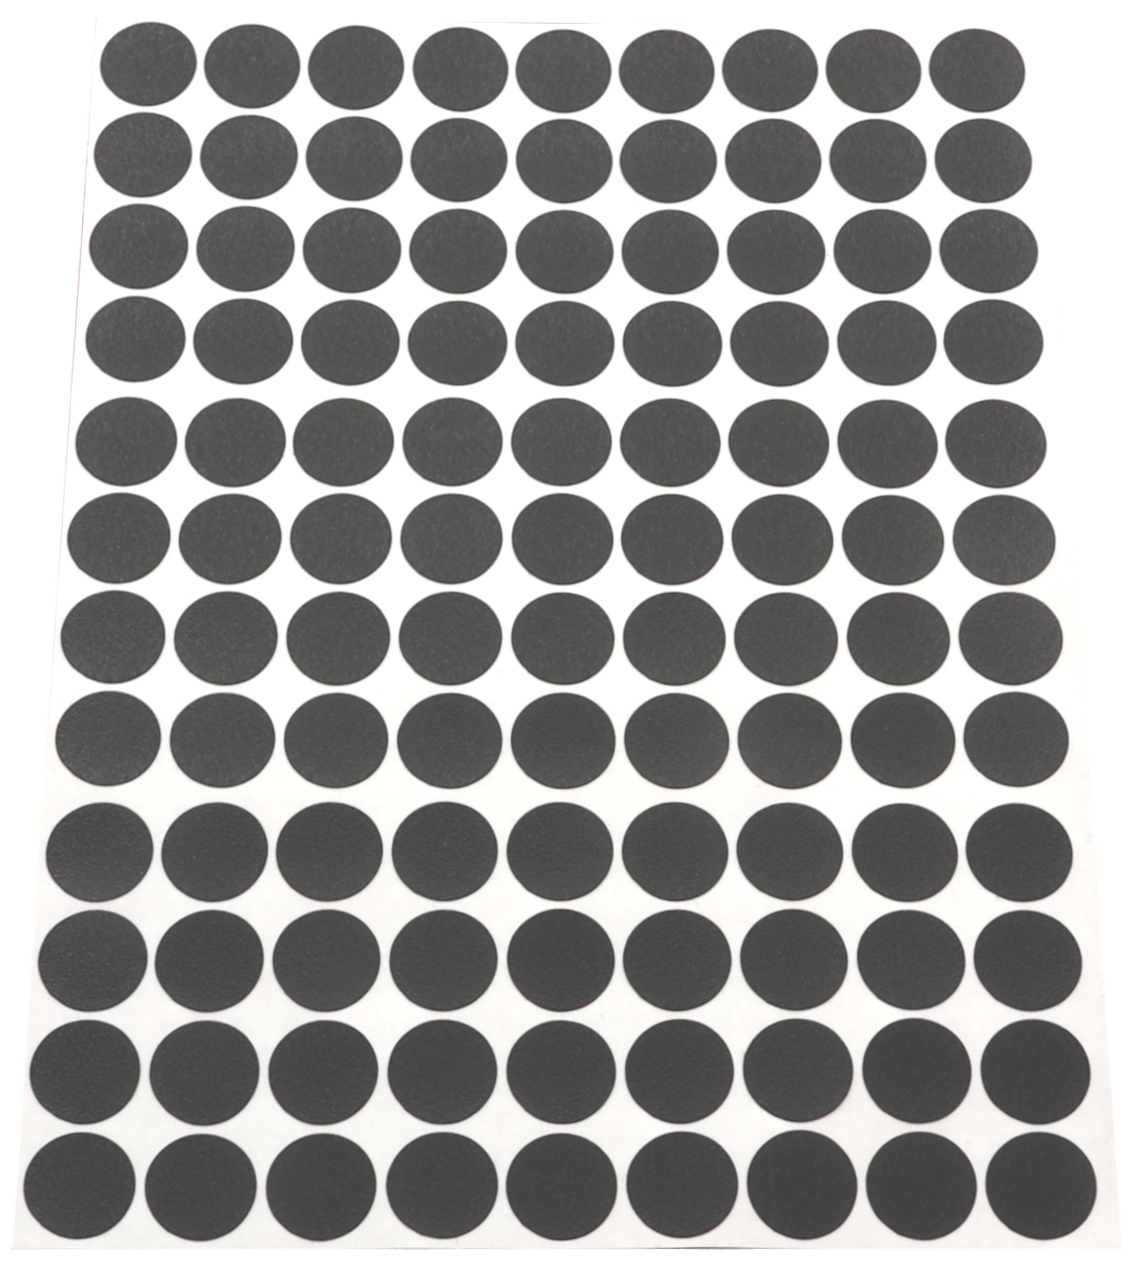 Image Adhesive PVC screw cover, textured anthracite (sheet of 108 stickers), 14 mm diameter